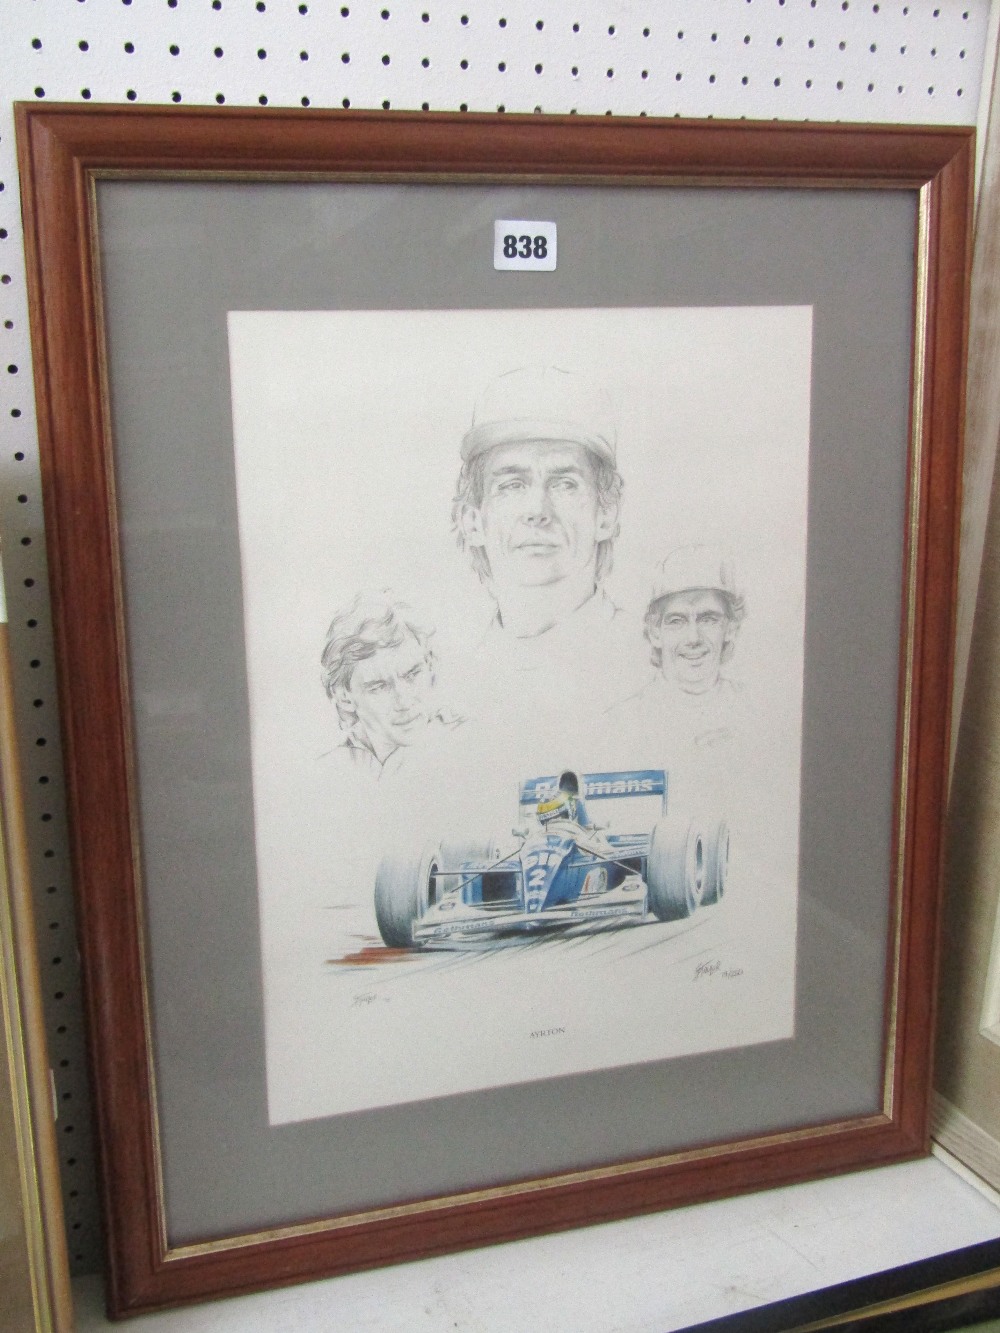 A signed limited edition print after S Taylor showing Ayrton Senna, edition number 19/250,